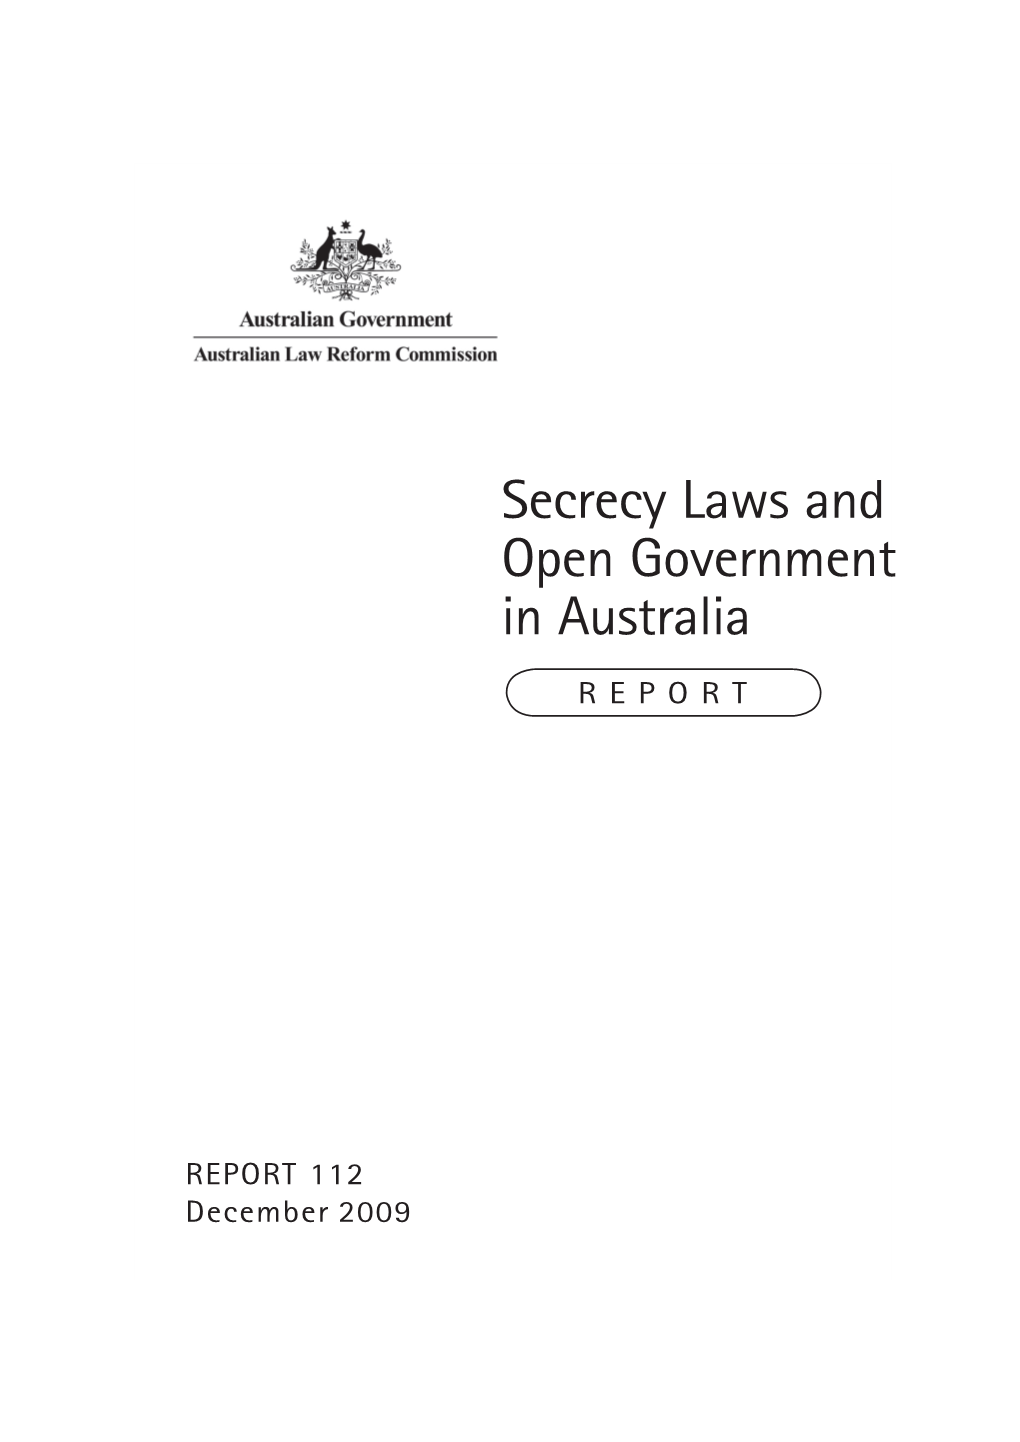 Secrecy Laws and Open Government in Australia